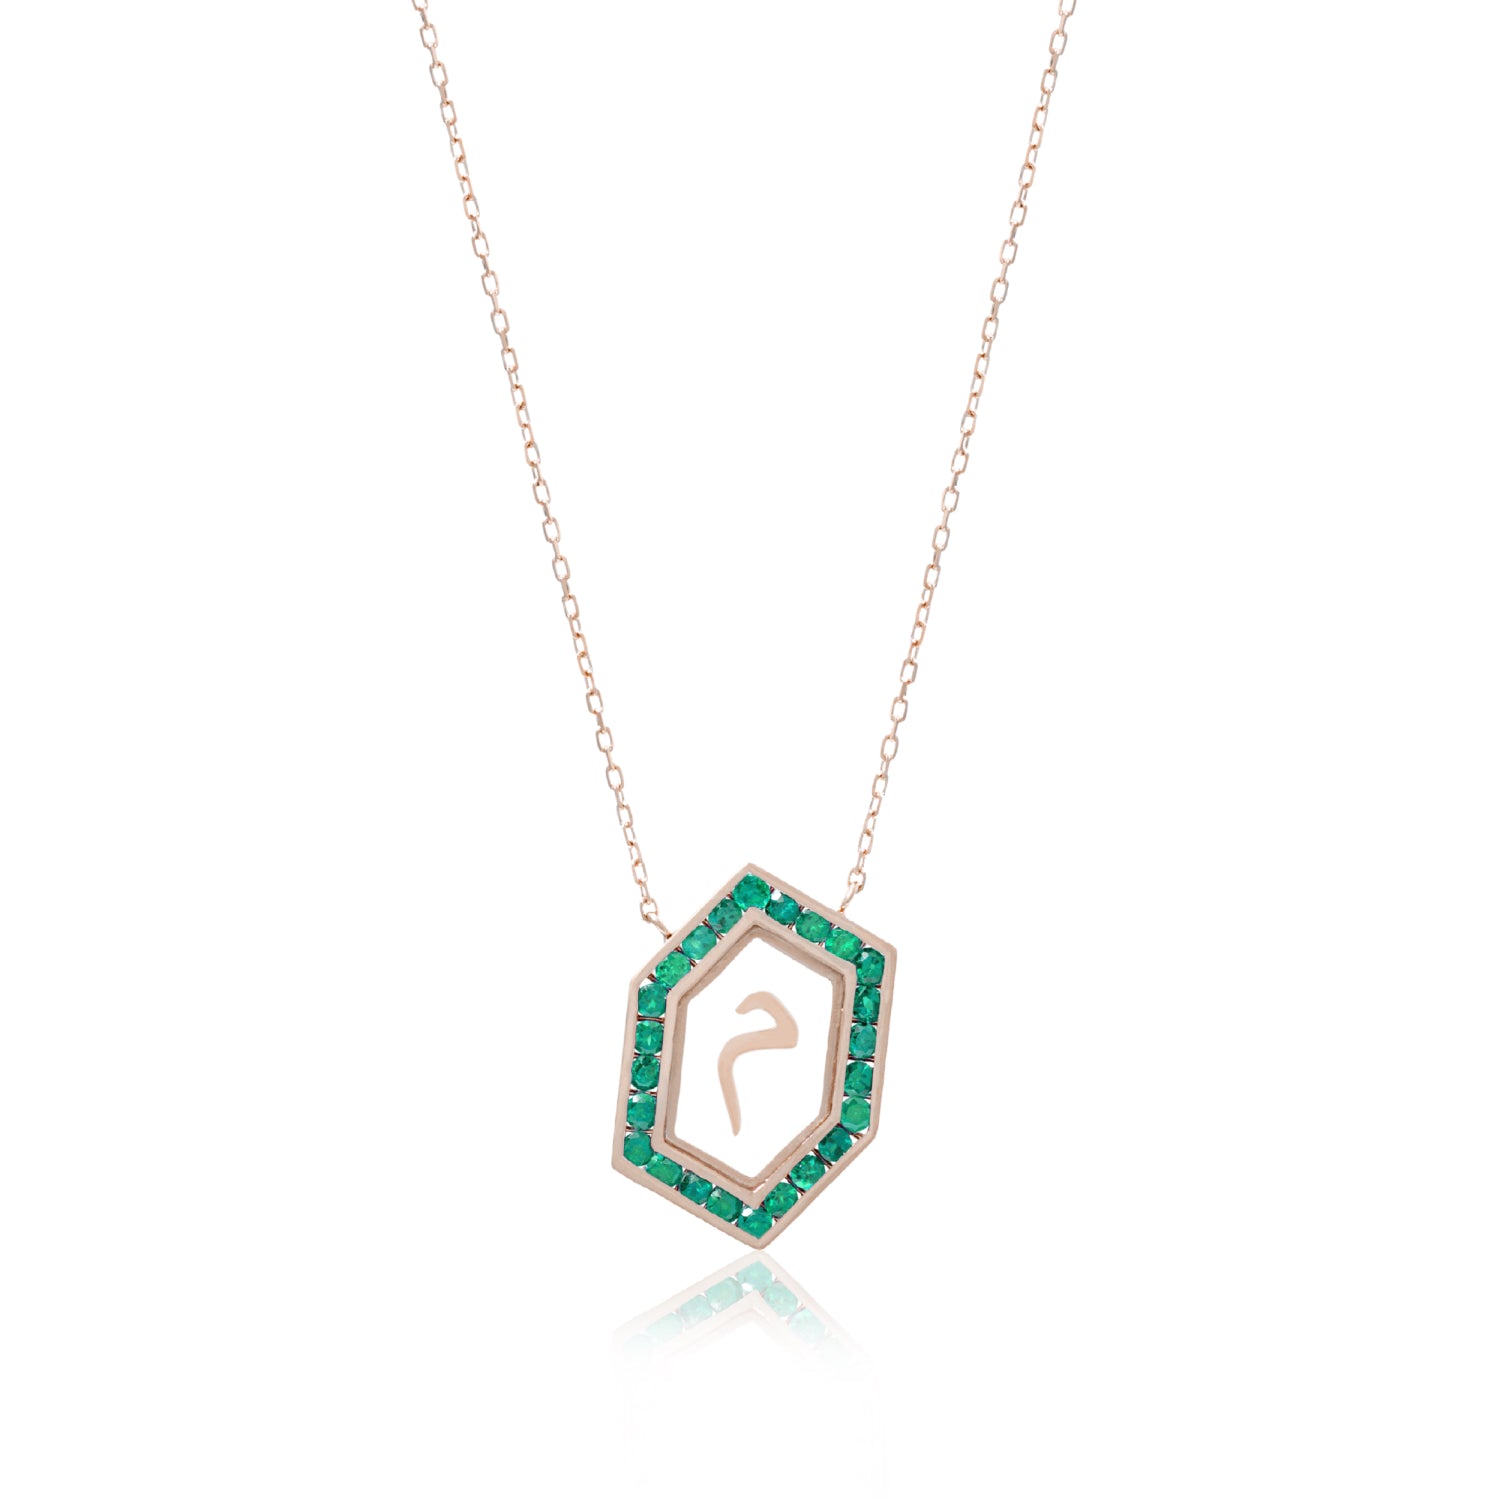 Qamoos 1.0 Letter م Emerald Necklace in Rose Gold